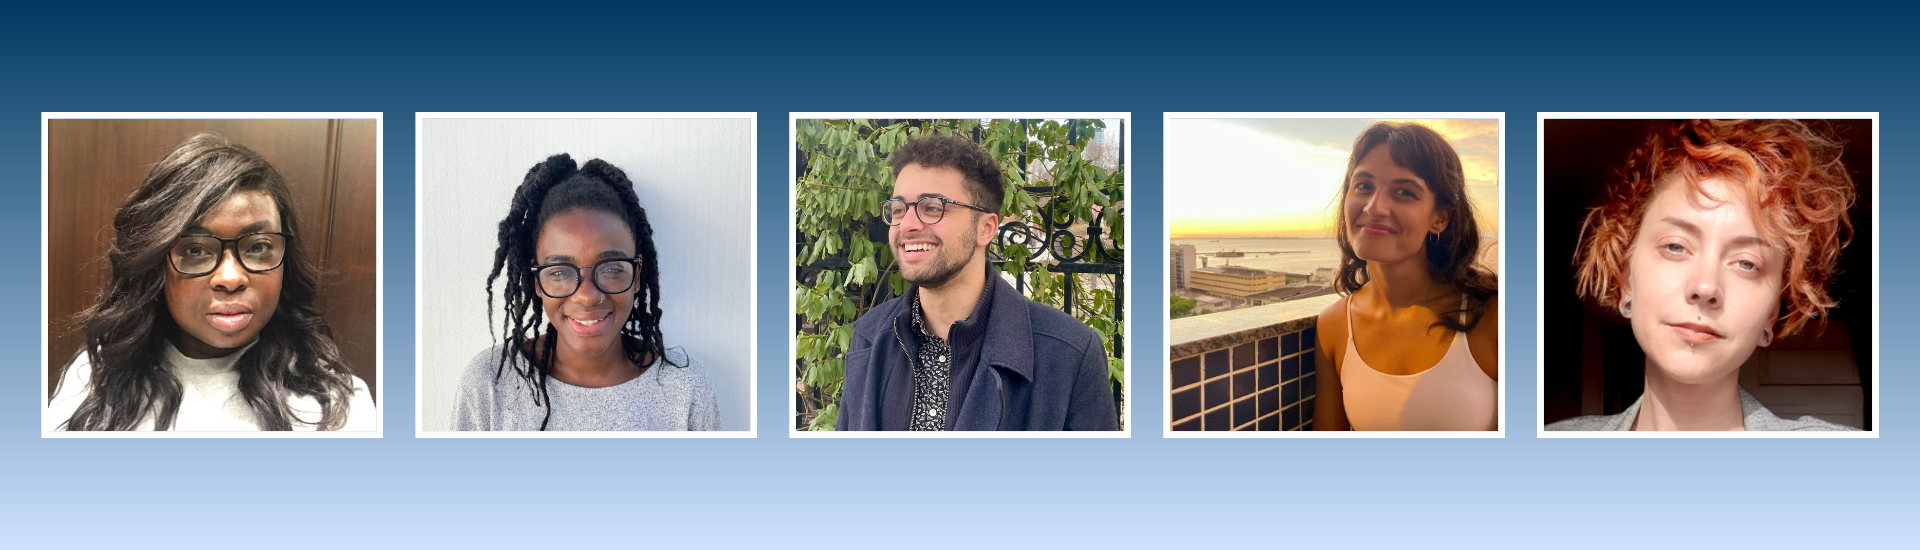 5 pictures in a row, each a portrait of a graduate student mentor